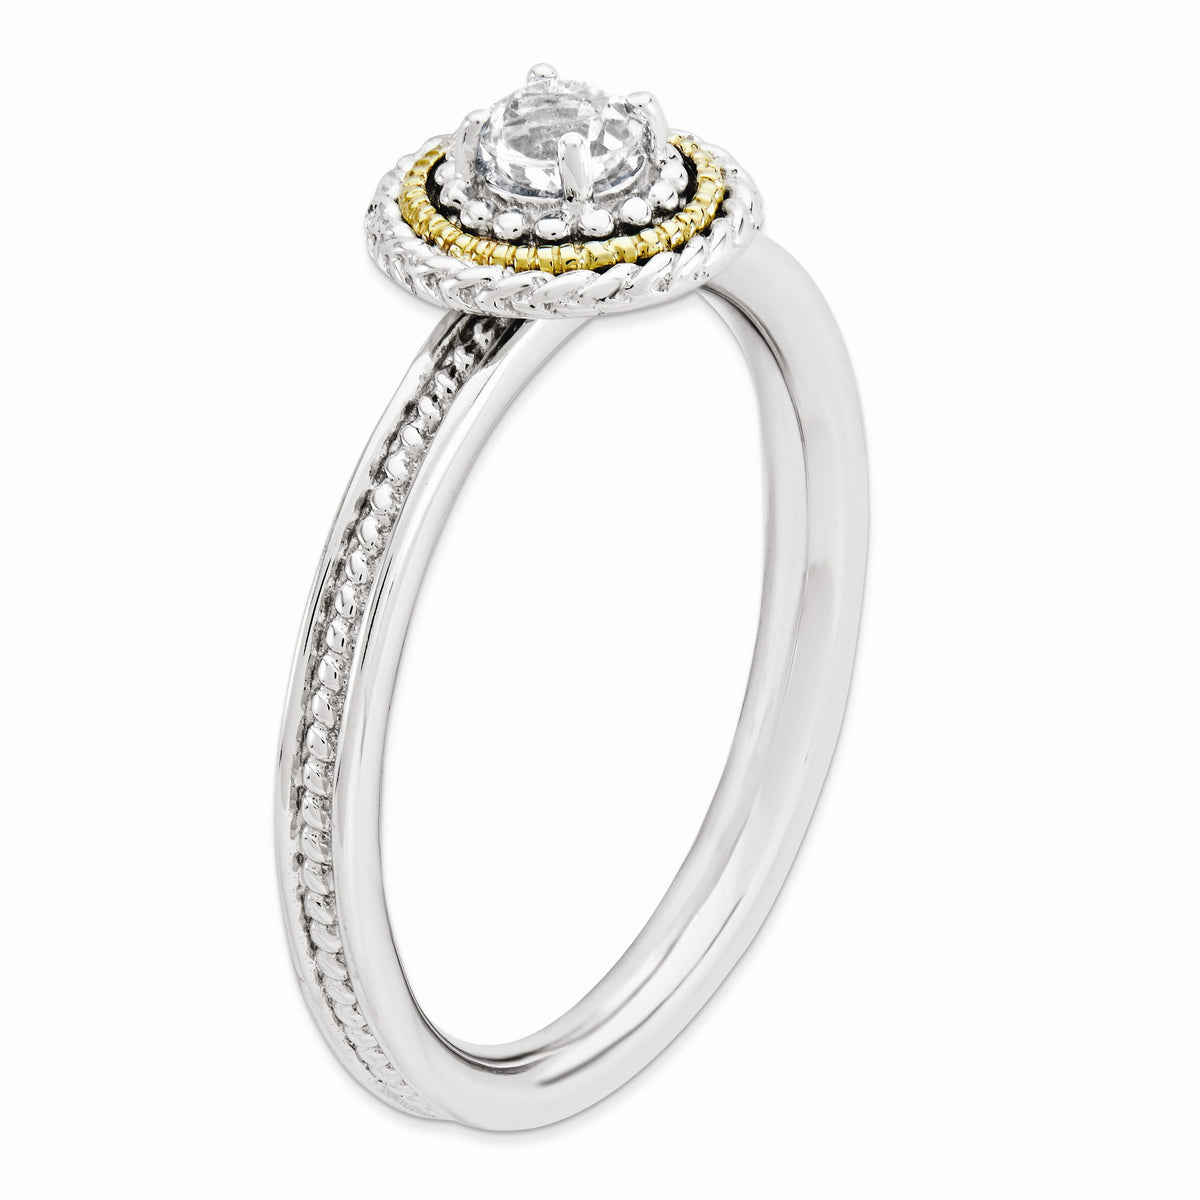 Alternate view of the Sterling Silver &amp; 14K Gold Plated Stackable White Topaz Ring by The Black Bow Jewelry Co.